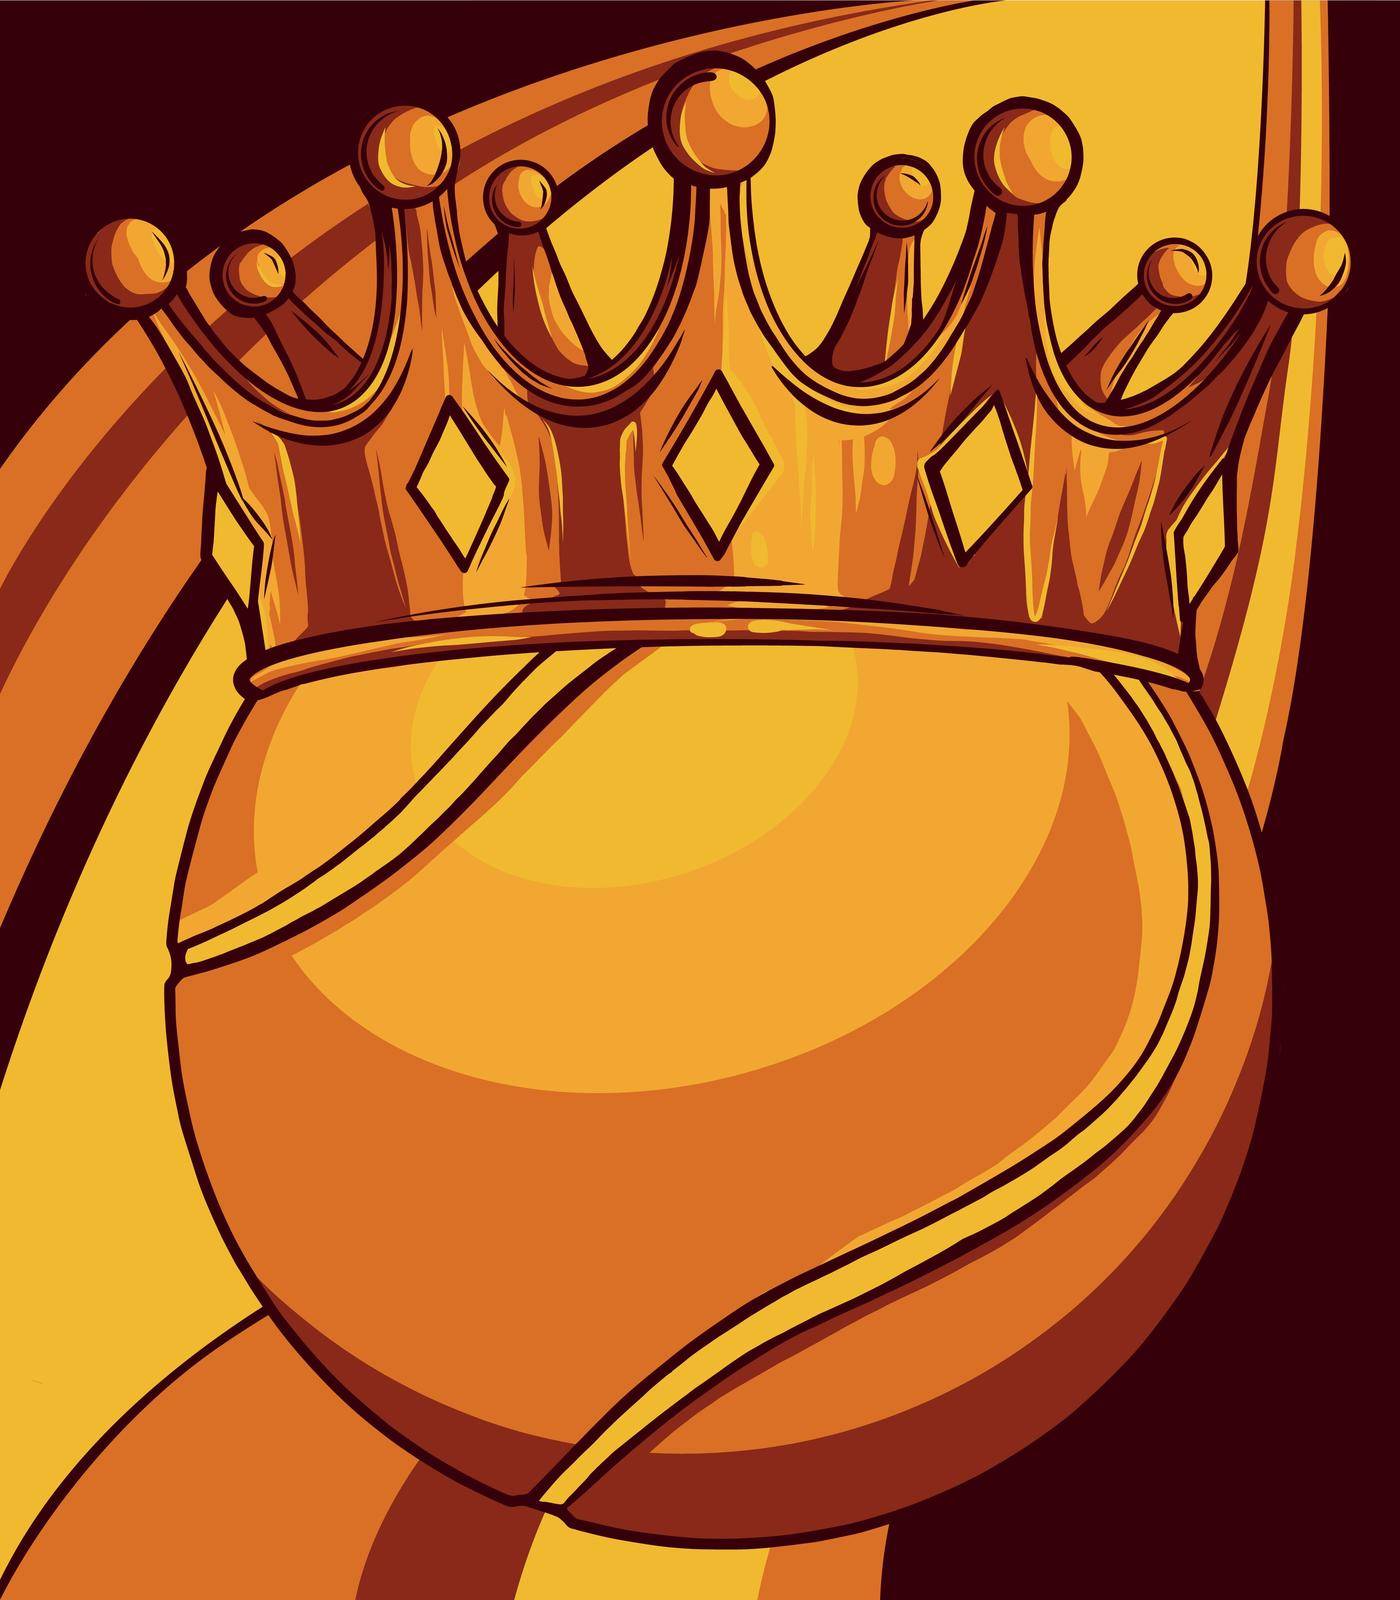 King of tennis concept, a tennis ball wearing a gold crown vector by dean